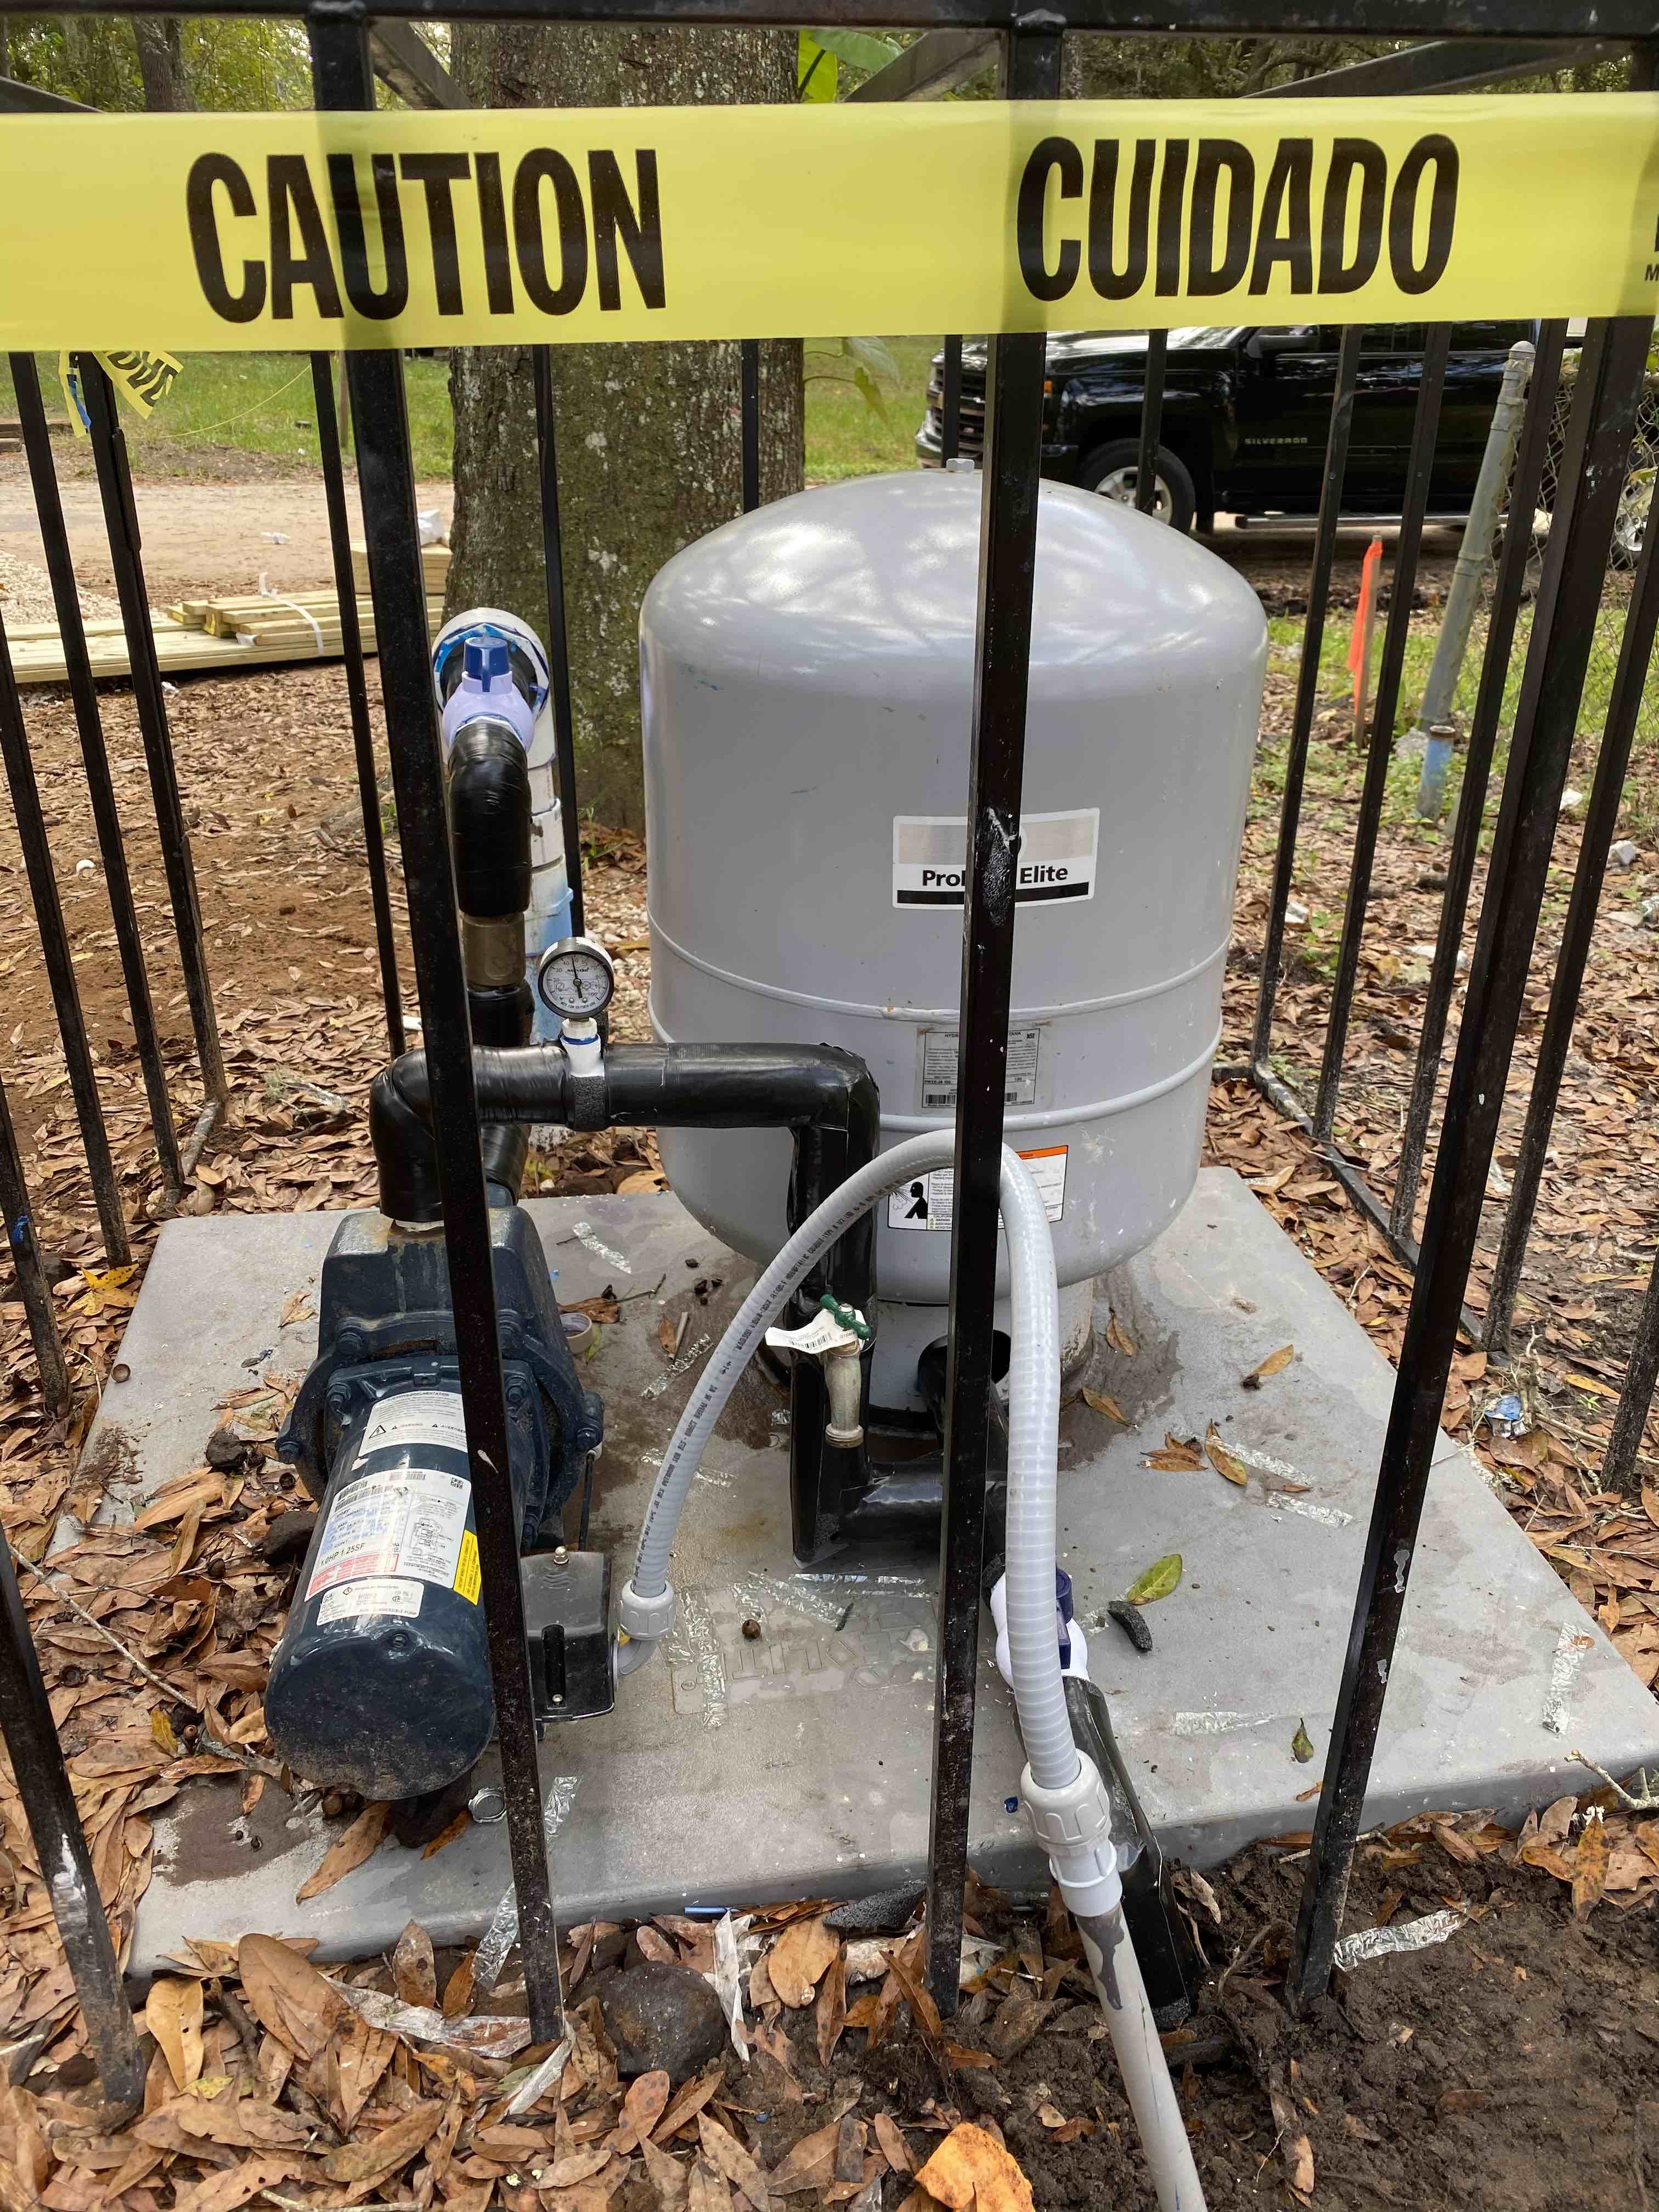 Outdoor water system